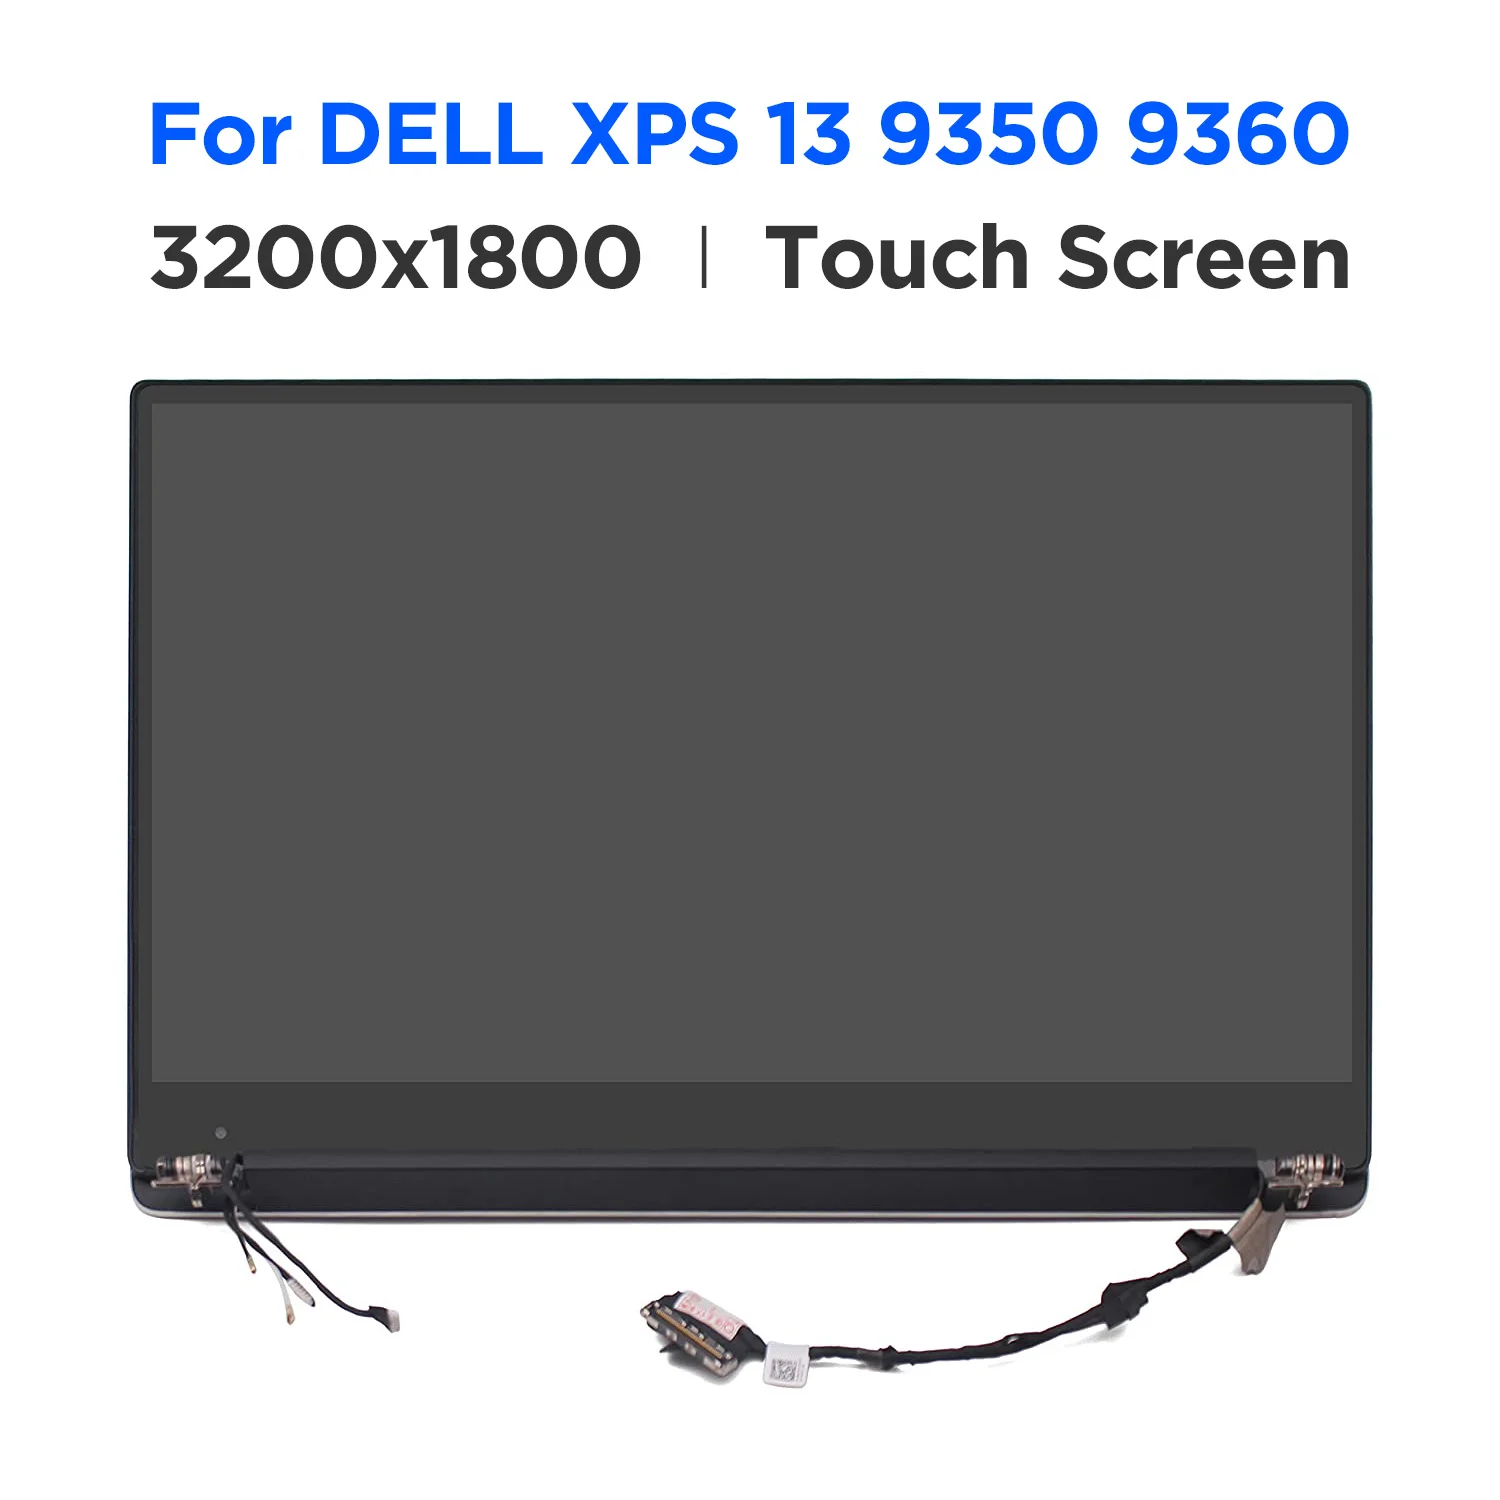 Original 13.3 LCD Touch Screen Digitizer Complete Assembly for Dell XPS 13 9343 9350 9360 P54G WT5X0 N6CH2 HP2YT 3200x1800